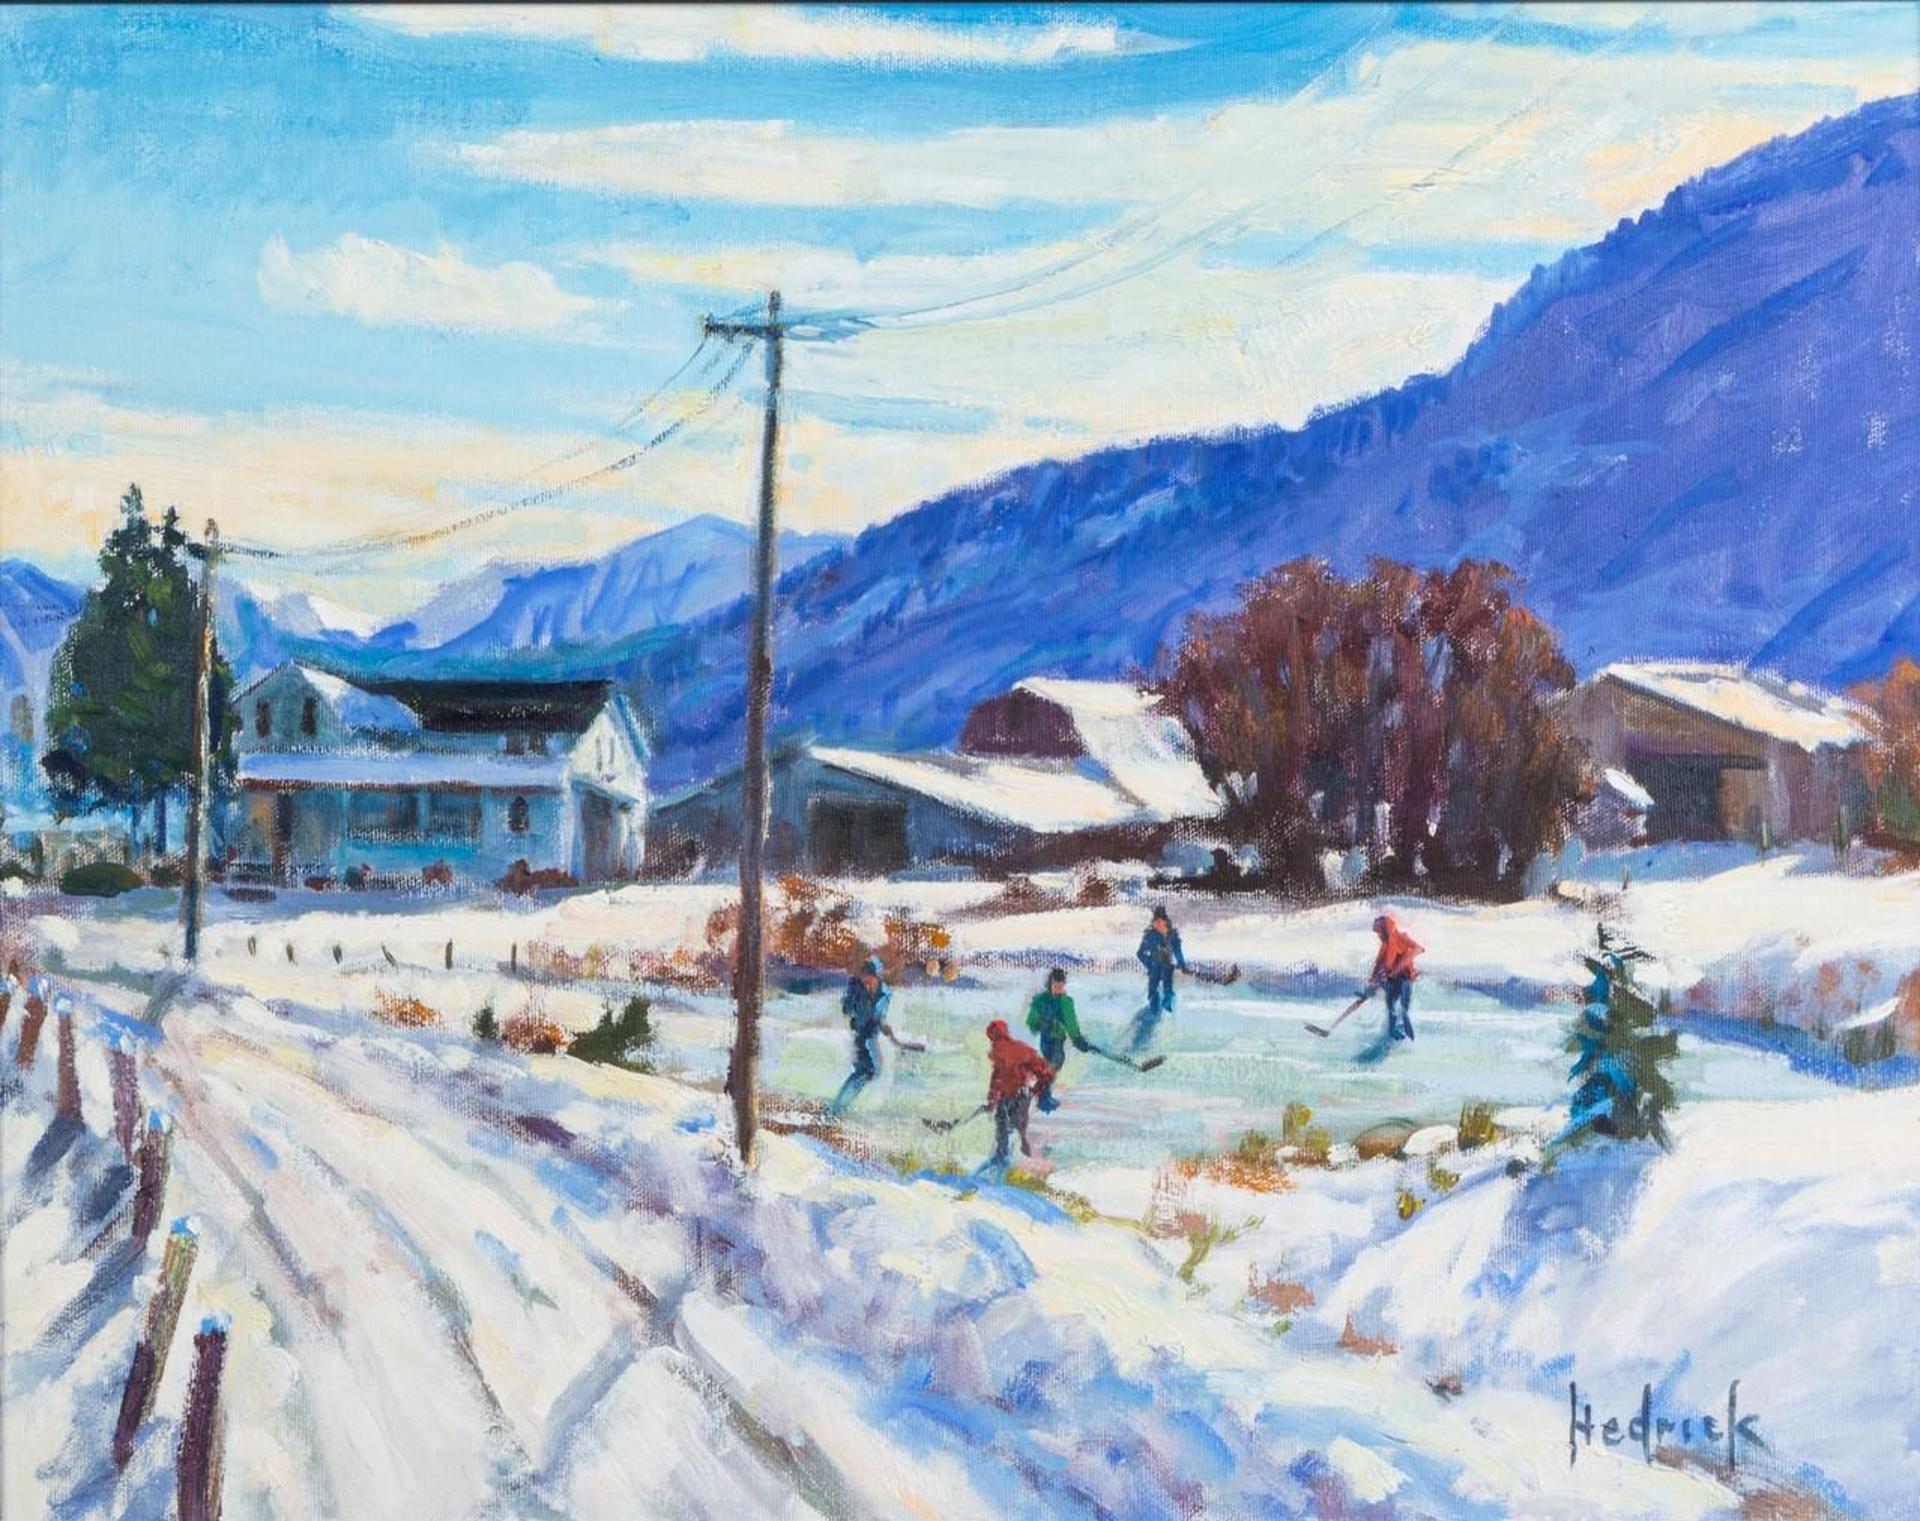 Ron Hedrick (1942) - Playing Hockey on the Pond